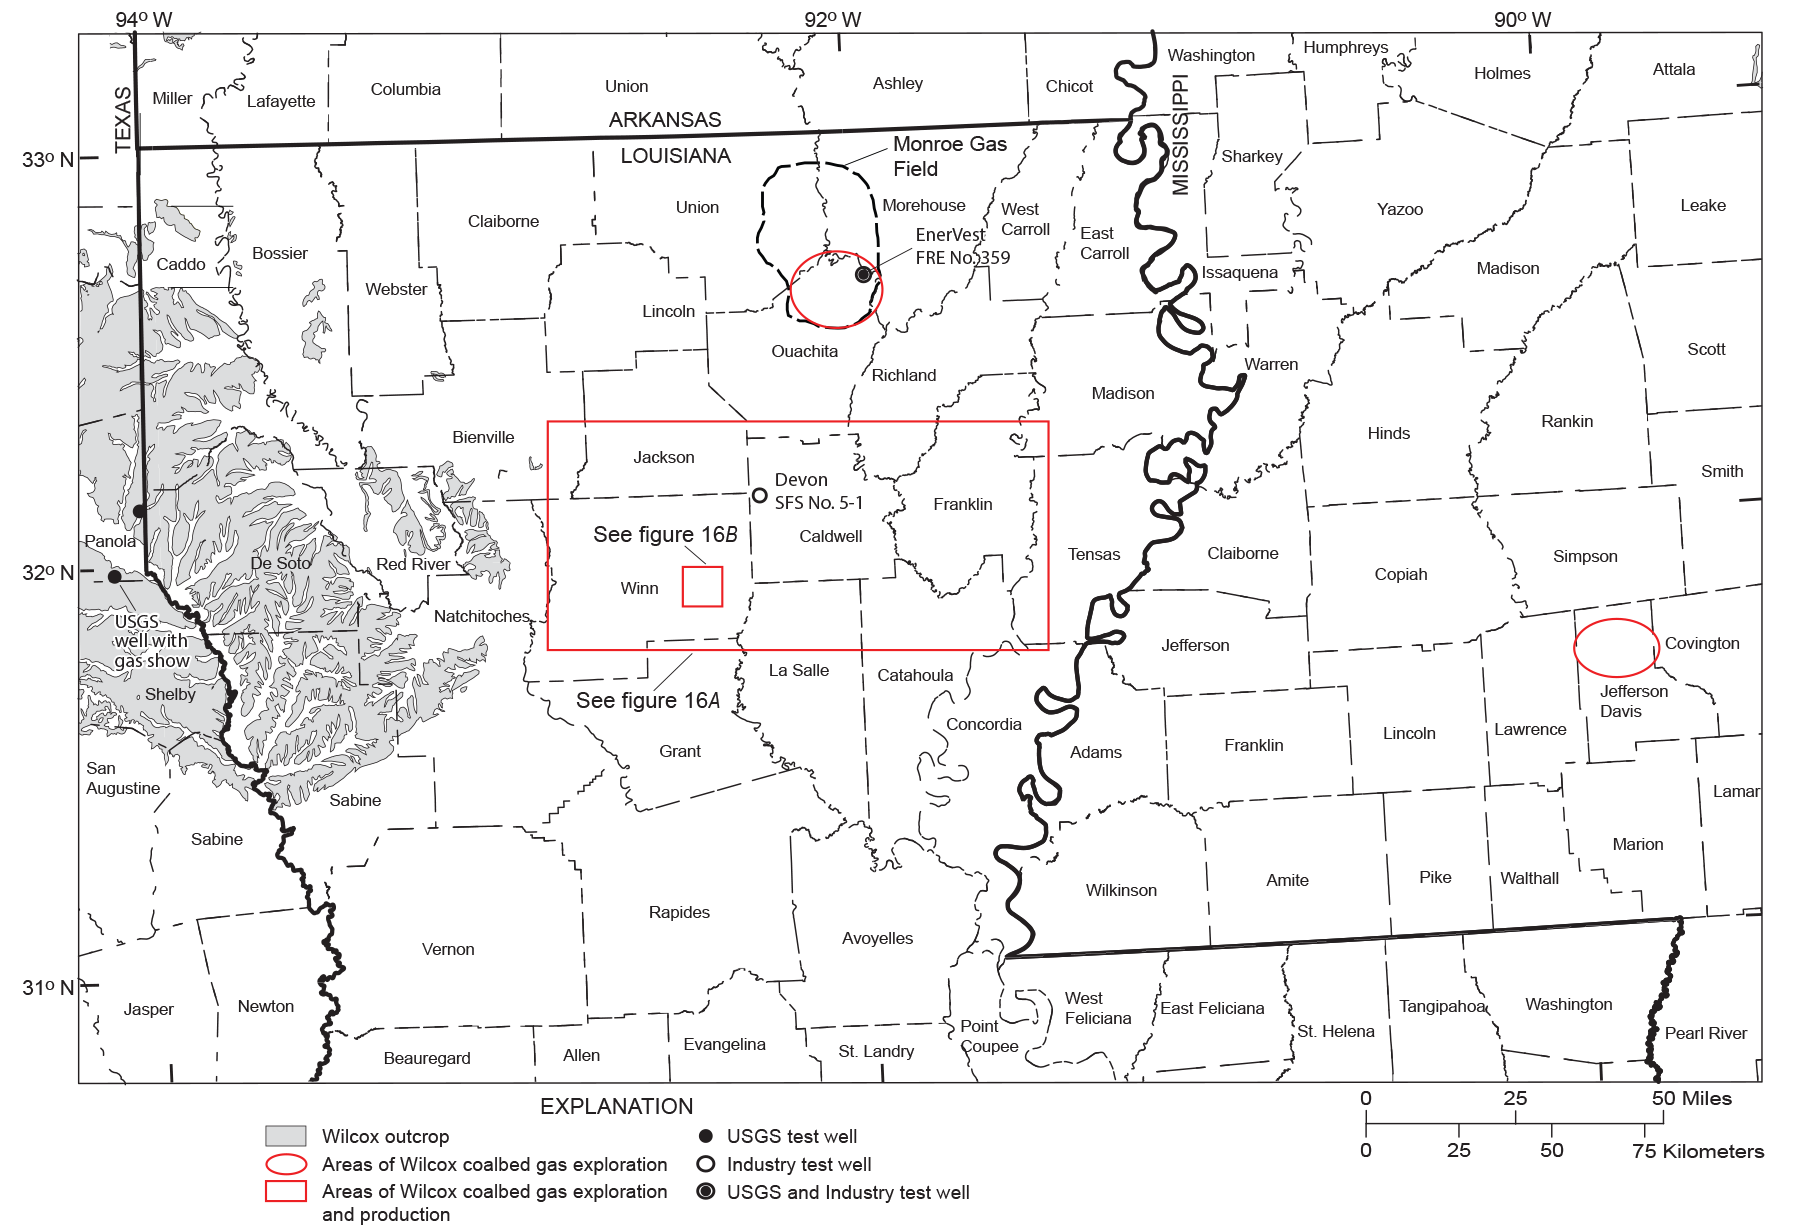 Wilcox Group outcrops as shaded areas, 3 kinds of test wells, and gas exploration
                        and production areas as red shapes.